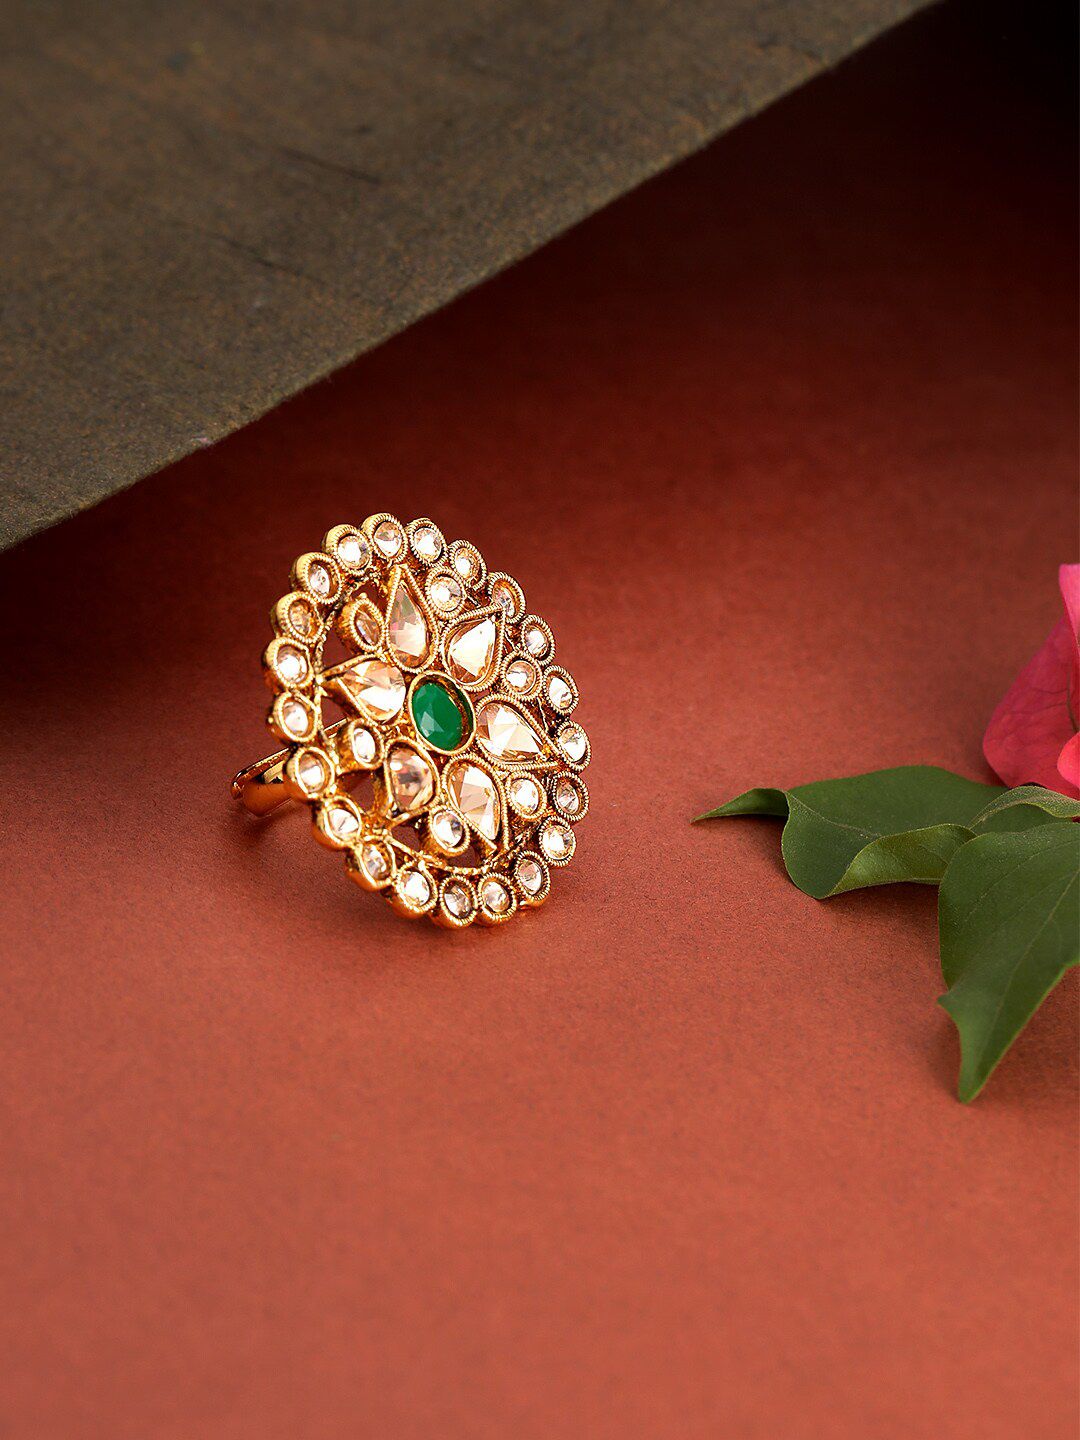 Priyaasi Gold-Plated Green & White Stone Studded Floral Designed Finger Ring Price in India